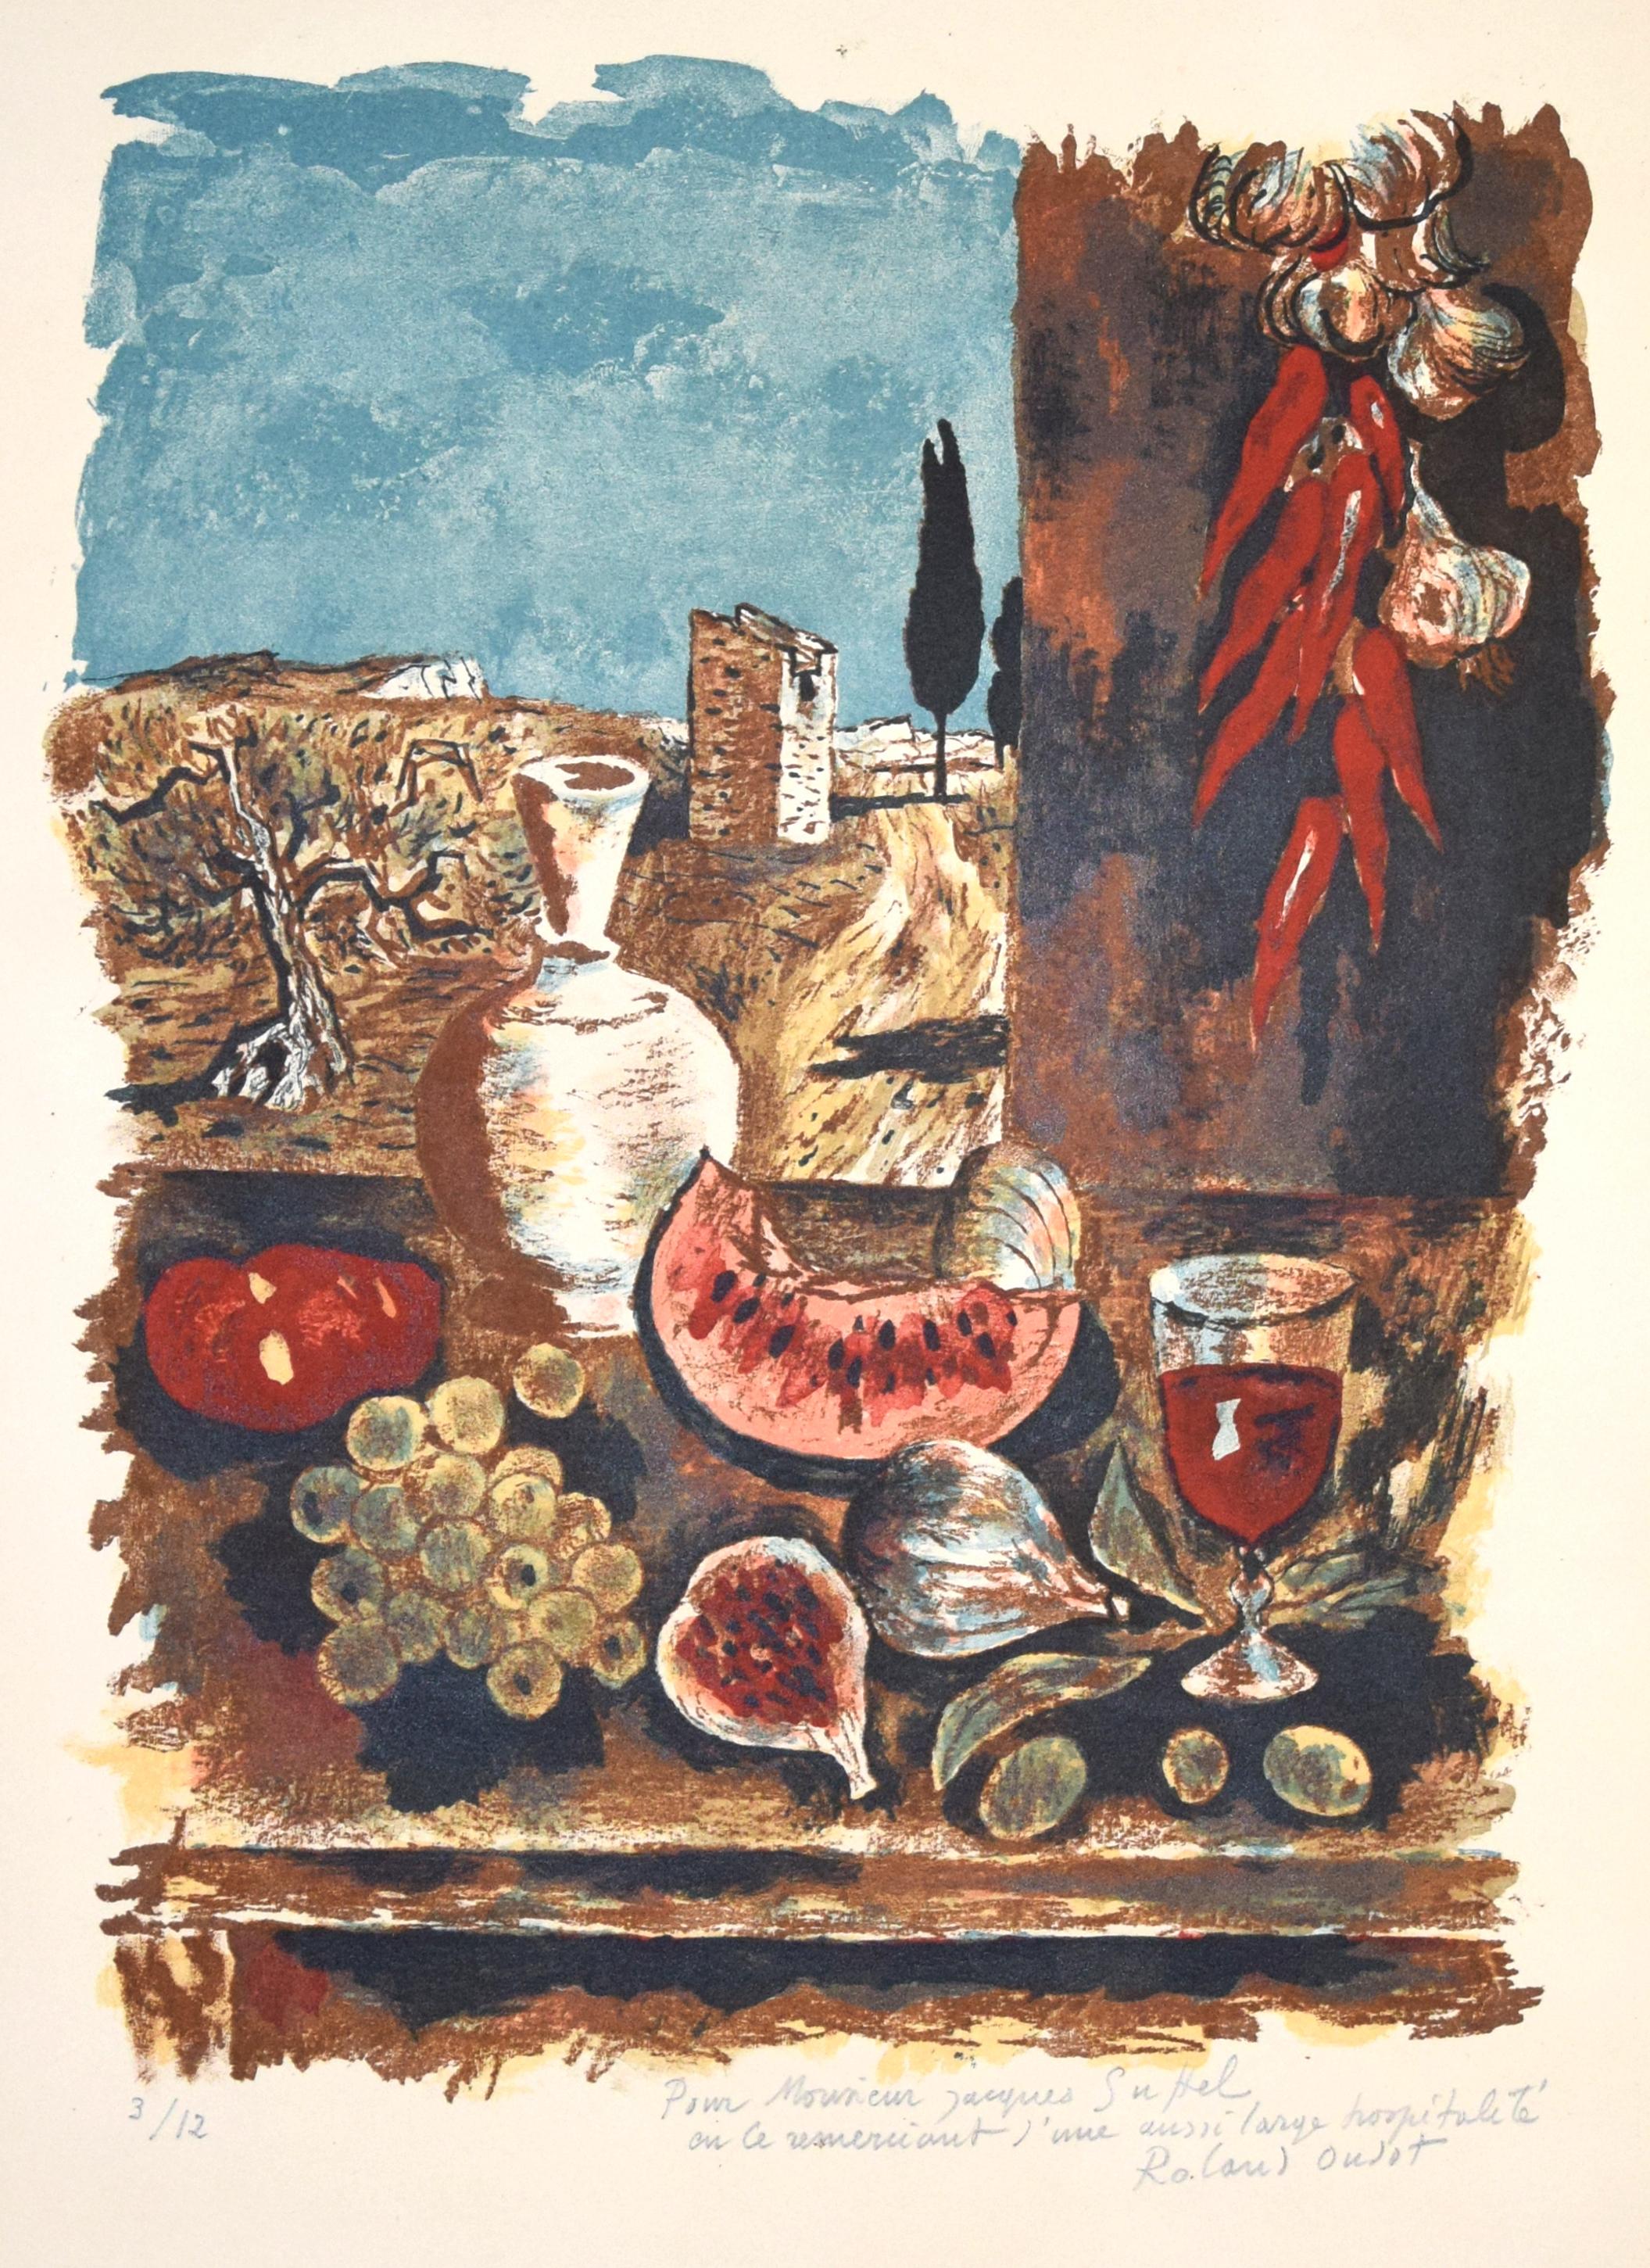 Still Life with Blue Sky is an original artwork realized by Roland Oudot in the XX Century. Original colored Lithograph. 

Numbered in pencil on the lower left; edition of 12 prints.

Hand-signed and dedicated in pencil by the artist on the lower